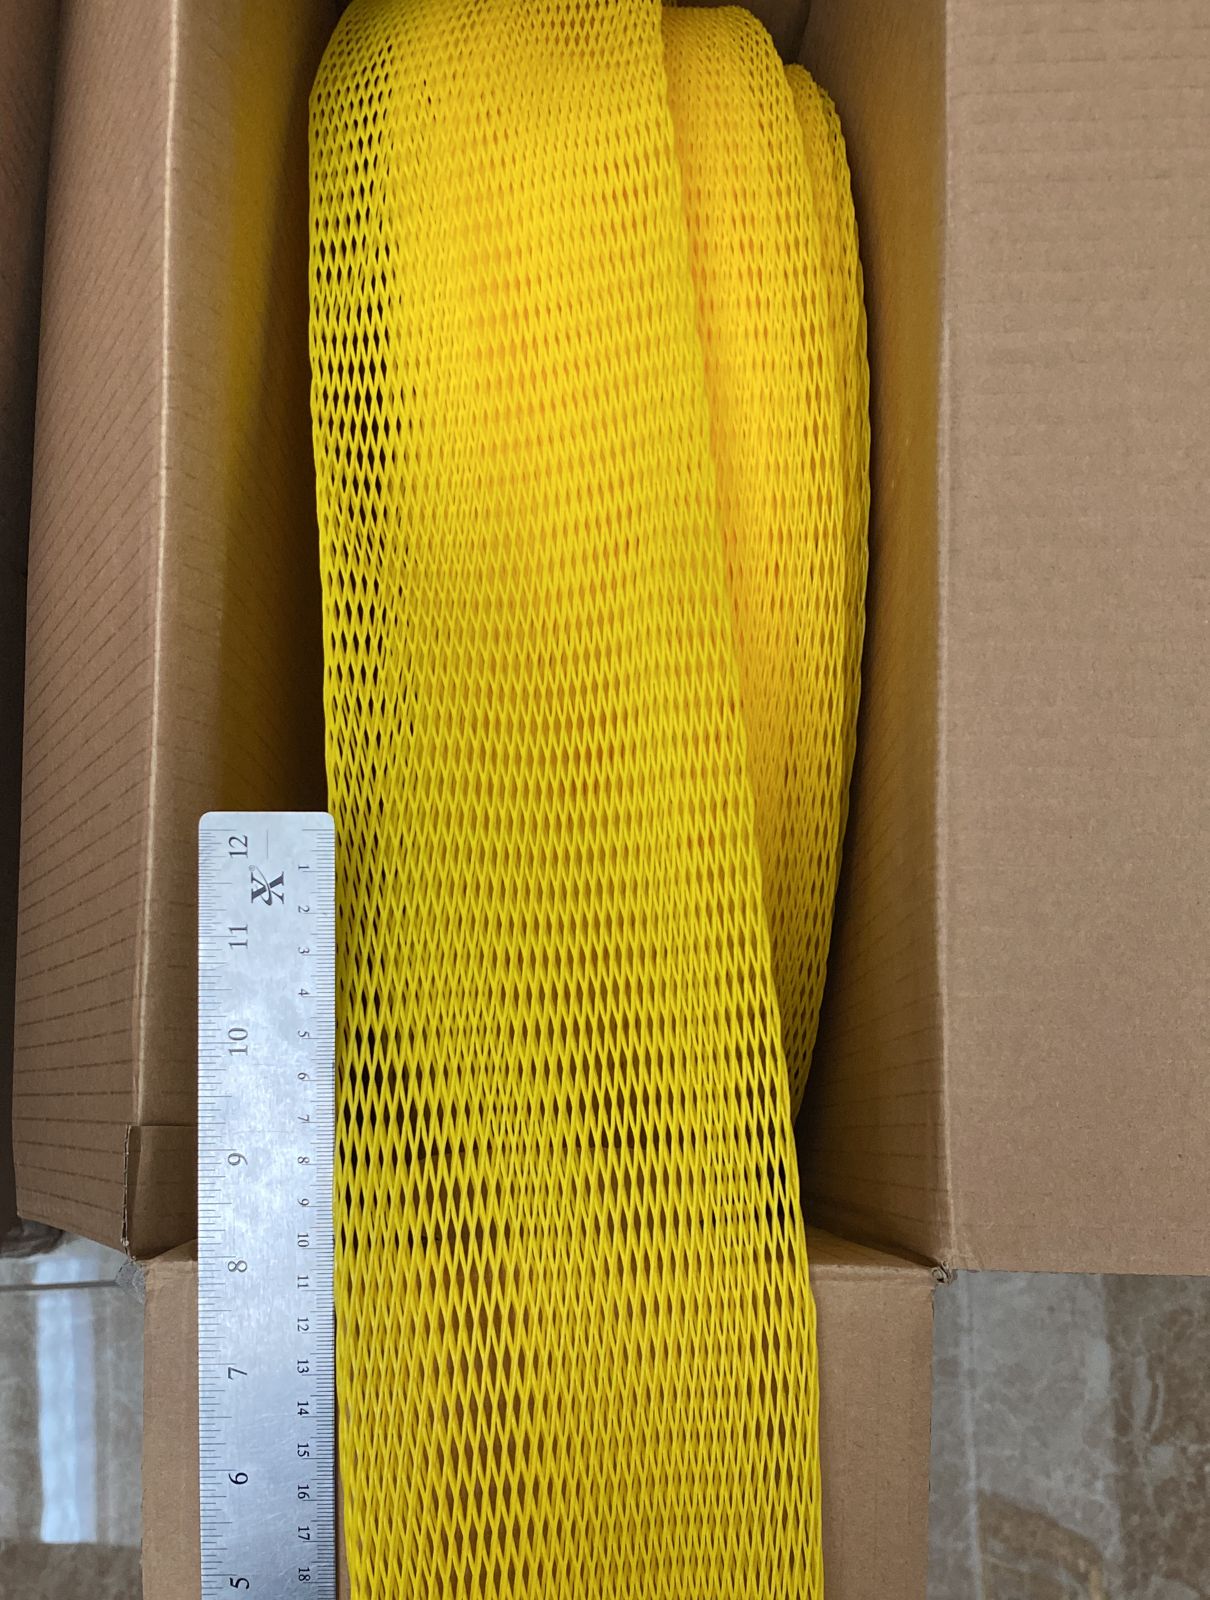 Protective Sleeve Net 100-200MM 50MTR PK (yellow) roll